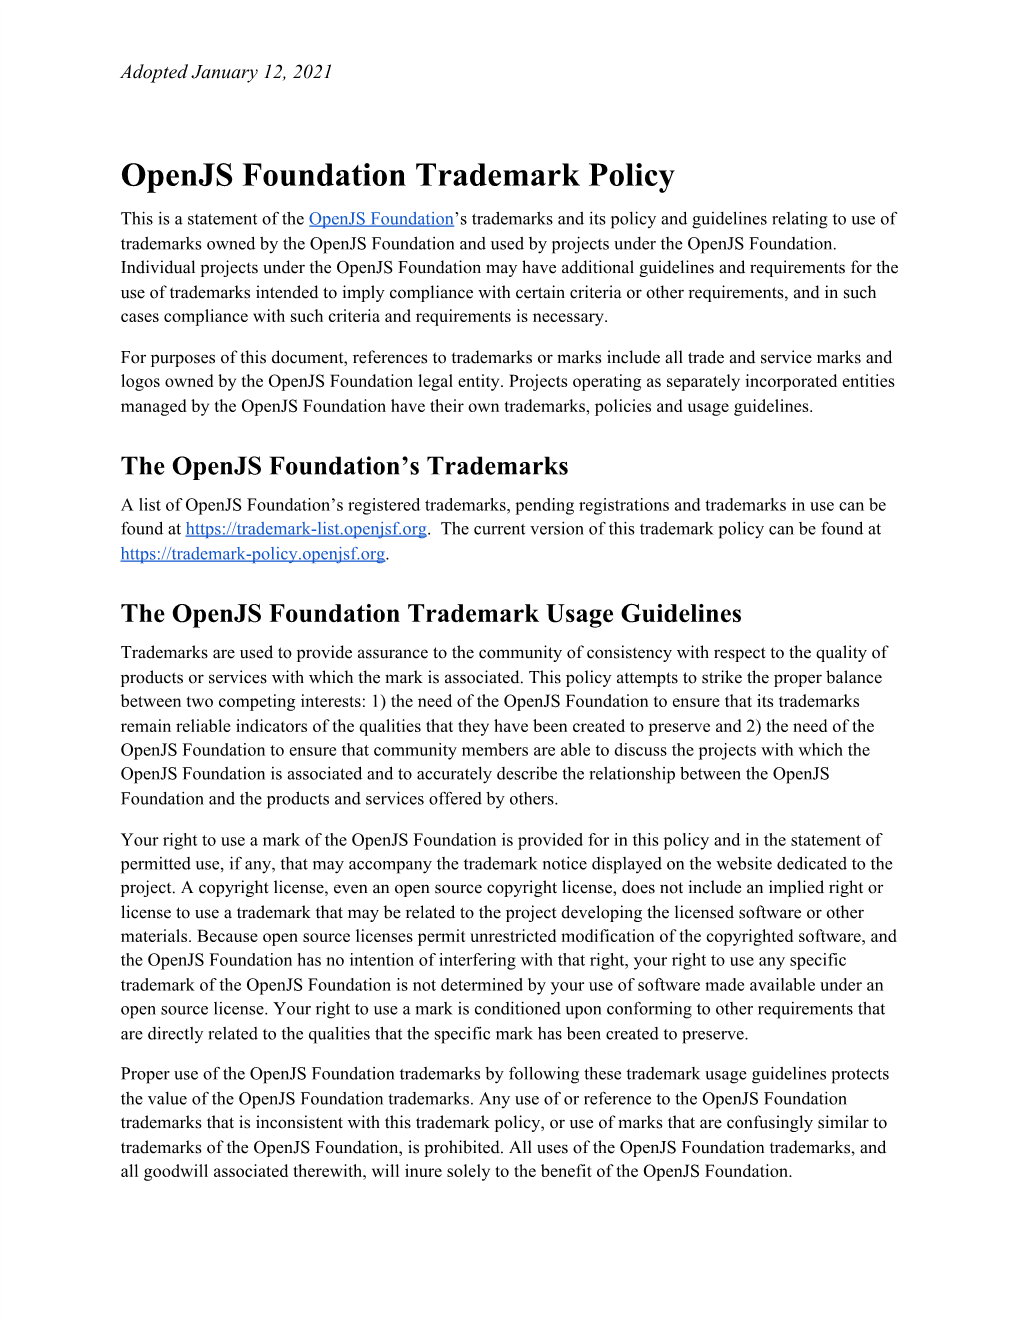 Openjs Foundation Trademark Policy